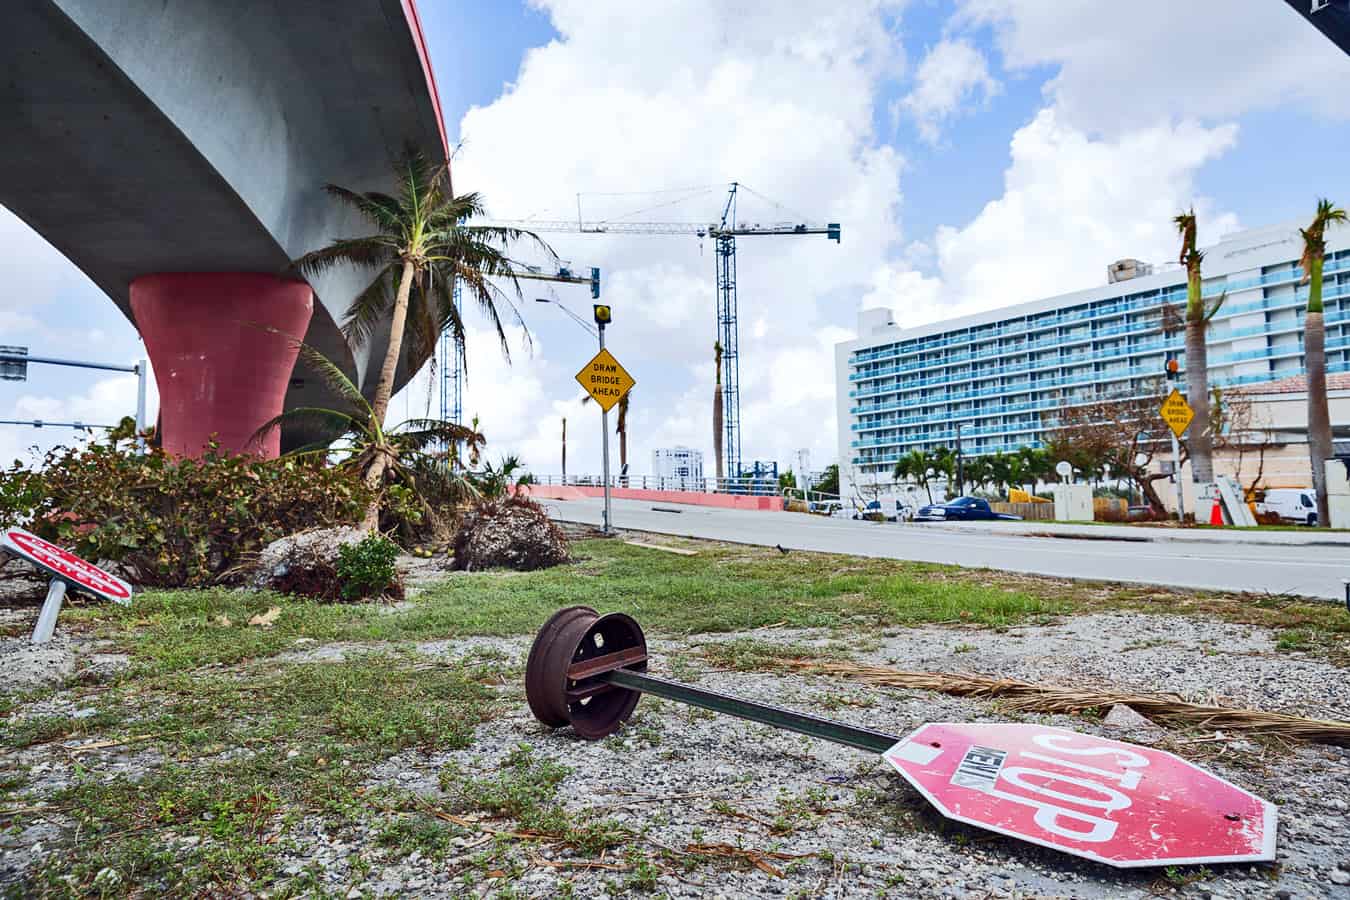 post-hurricane-in-miami-florida-which-created-a-lot-of-timeshare-assessment-fees-for-property-owners-across-the-country